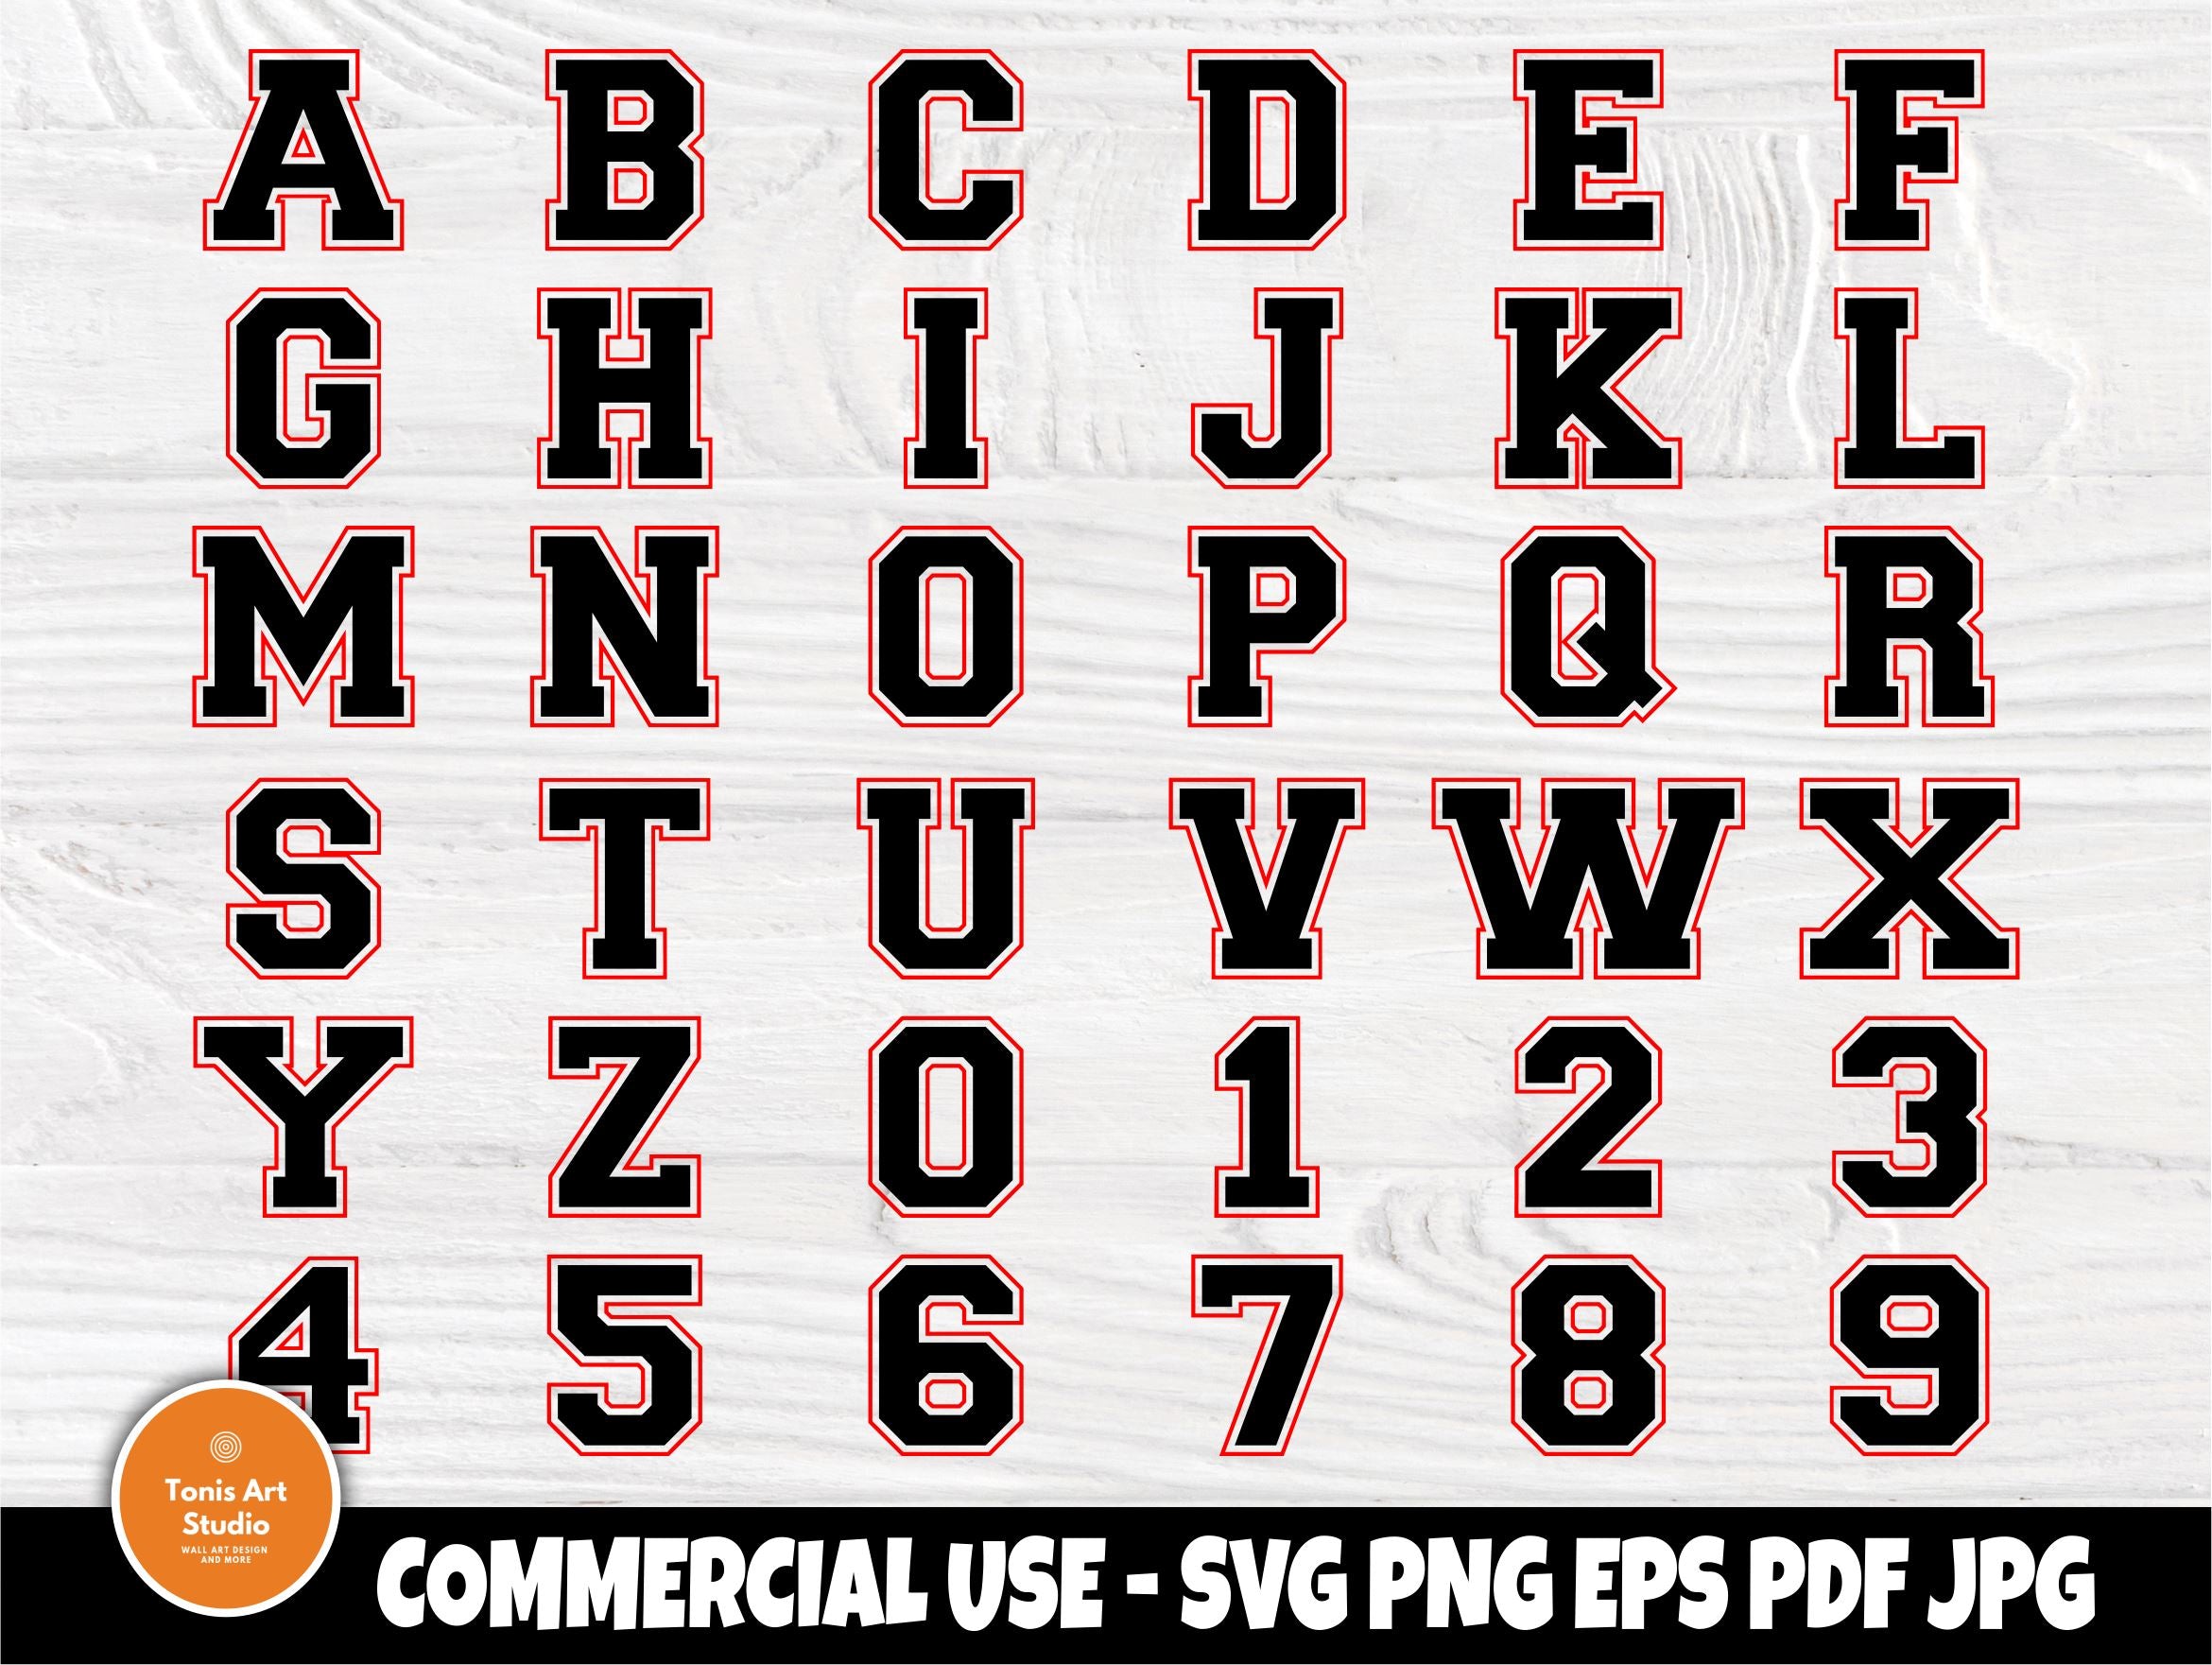 Jersey Font Letter Stencils (Number and Alphabet Lettering) – DIY Projects,  Patterns, Monograms, Designs, Templates